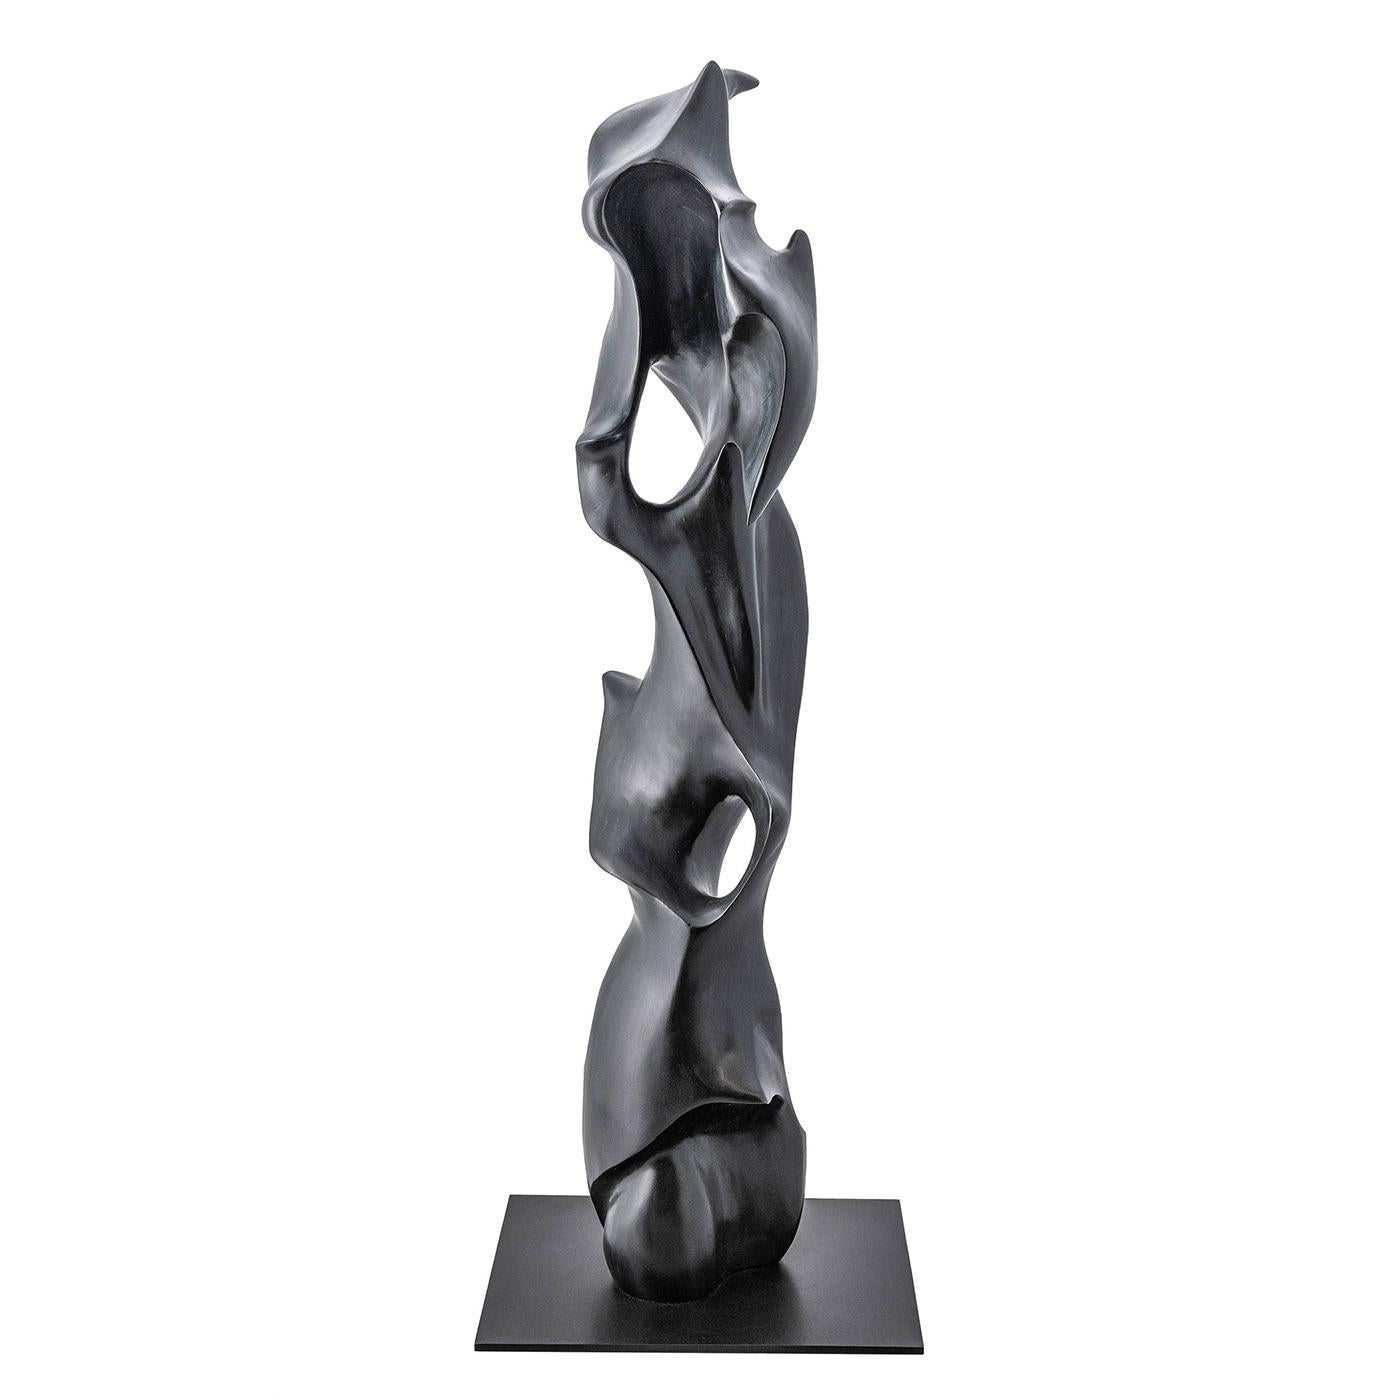 Sculpture waterfall black bronze all in solid
bronze in black finish, Measures: base: L26xD26xH0,5cm.